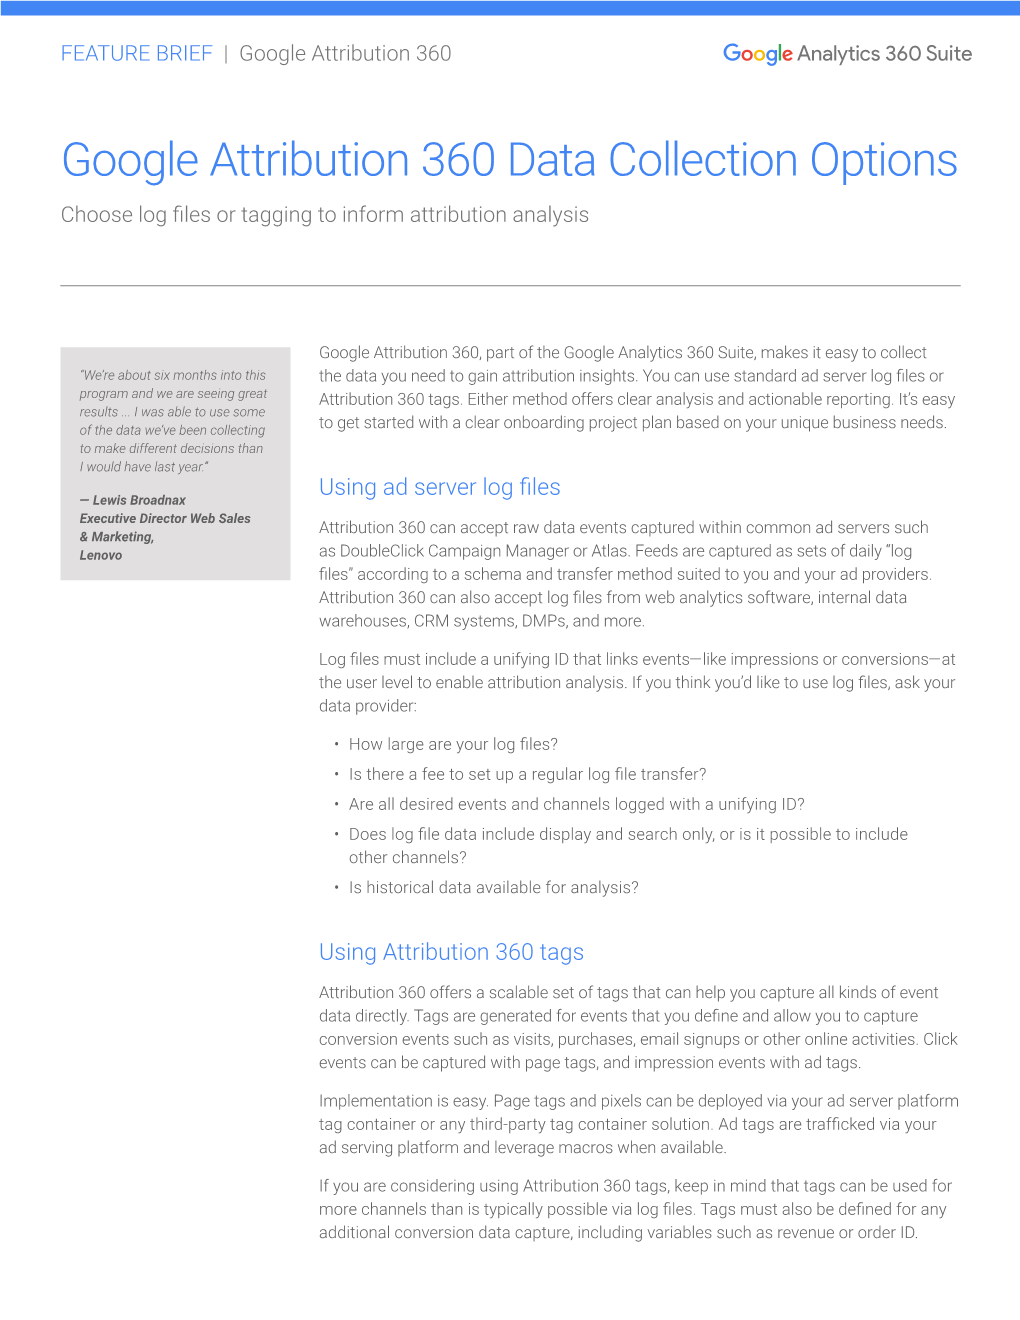 Google Attribution 360 Data Collection Options Choose Log Files Or Tagging to Inform Attribution Analysis